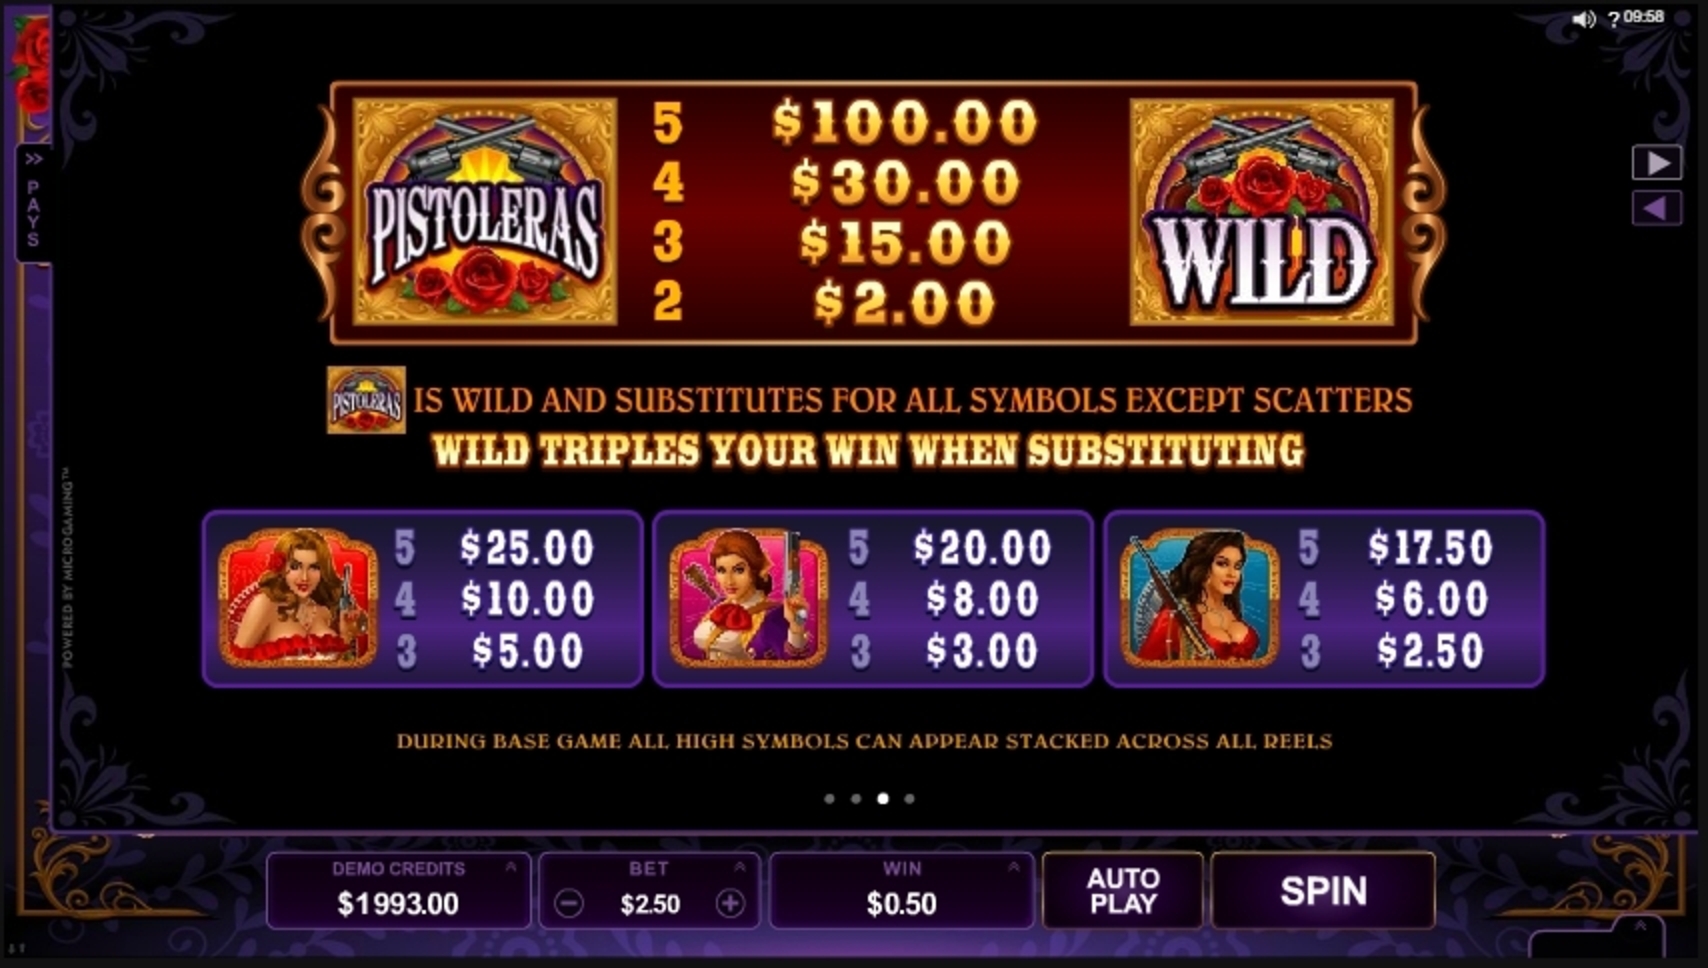 Info of Pistoleras Slot Game by Microgaming